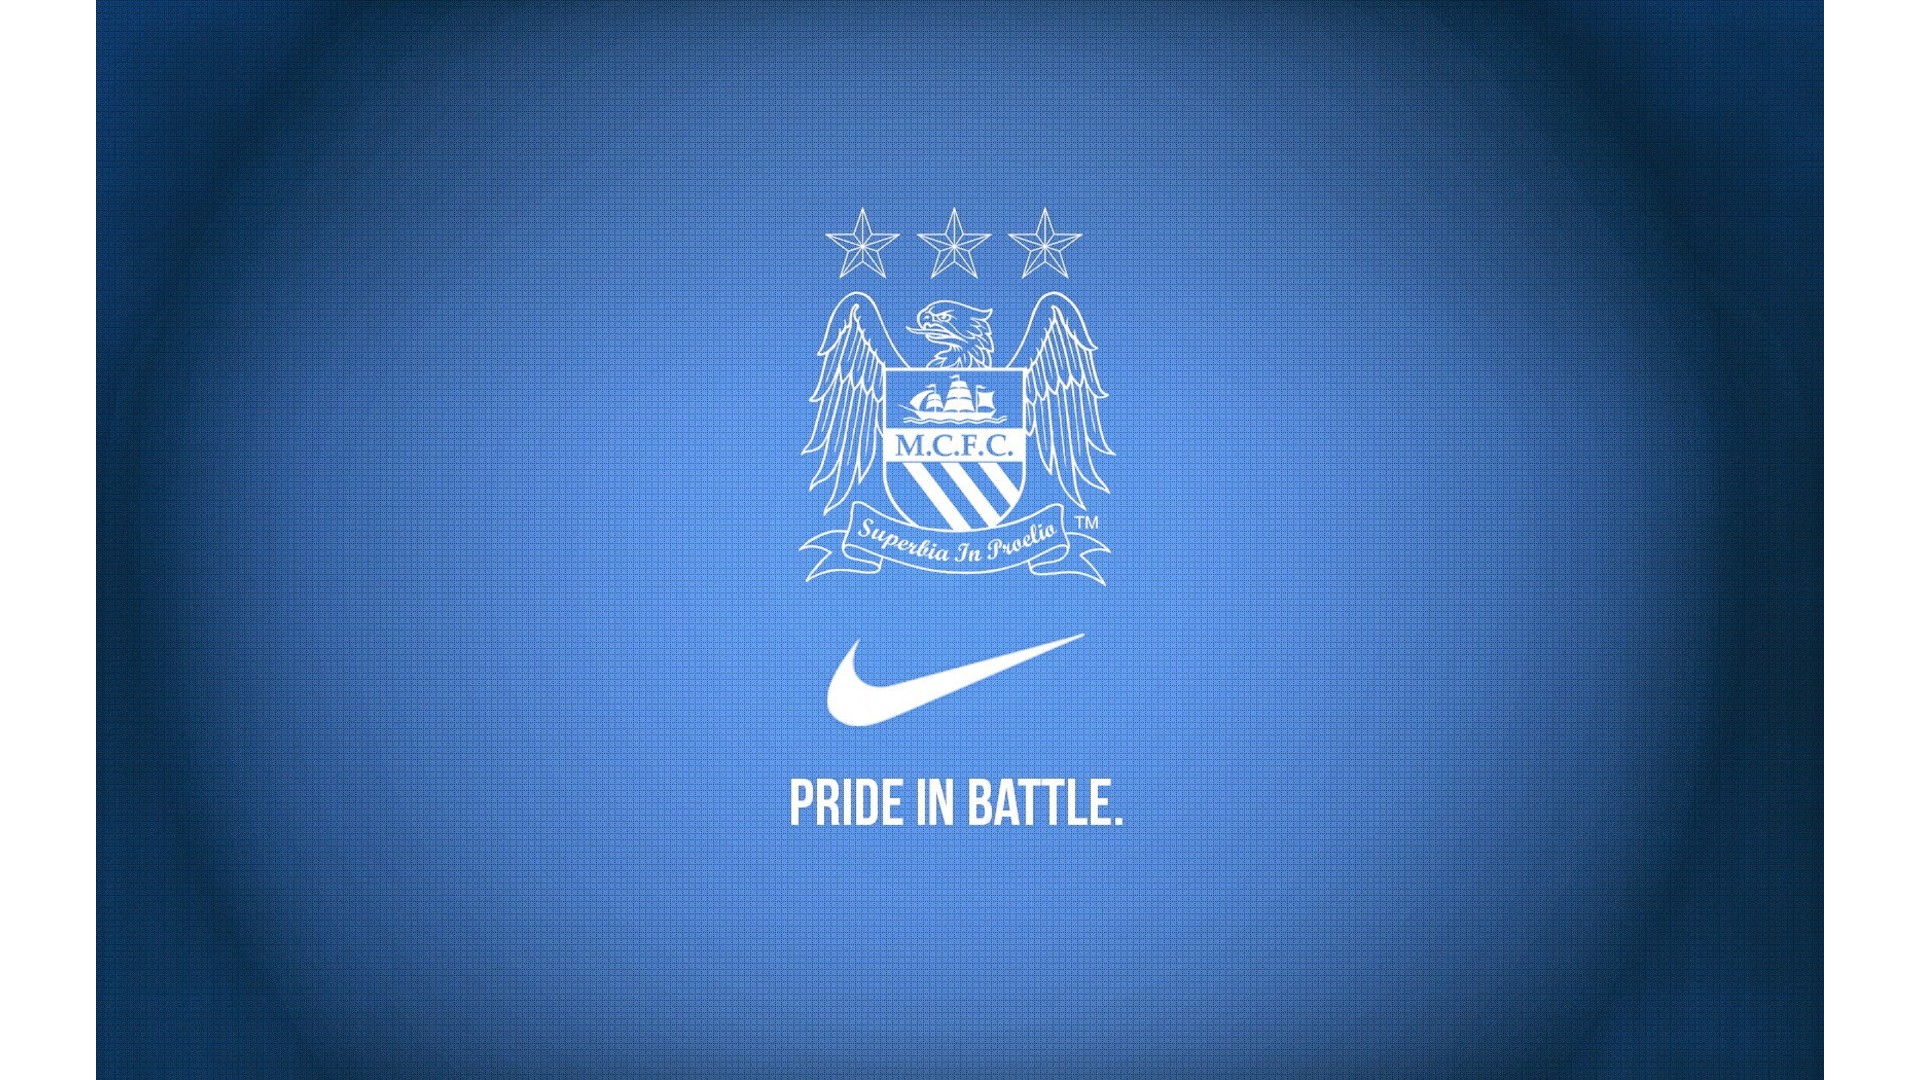 Wallpapers HD Manchester City with high-resolution 1920x1080 pixel. You can use this wallpaper for your Desktop Computers, Mac Screensavers, Windows Backgrounds, iPhone Wallpapers, Tablet or Android Lock screen and another Mobile device